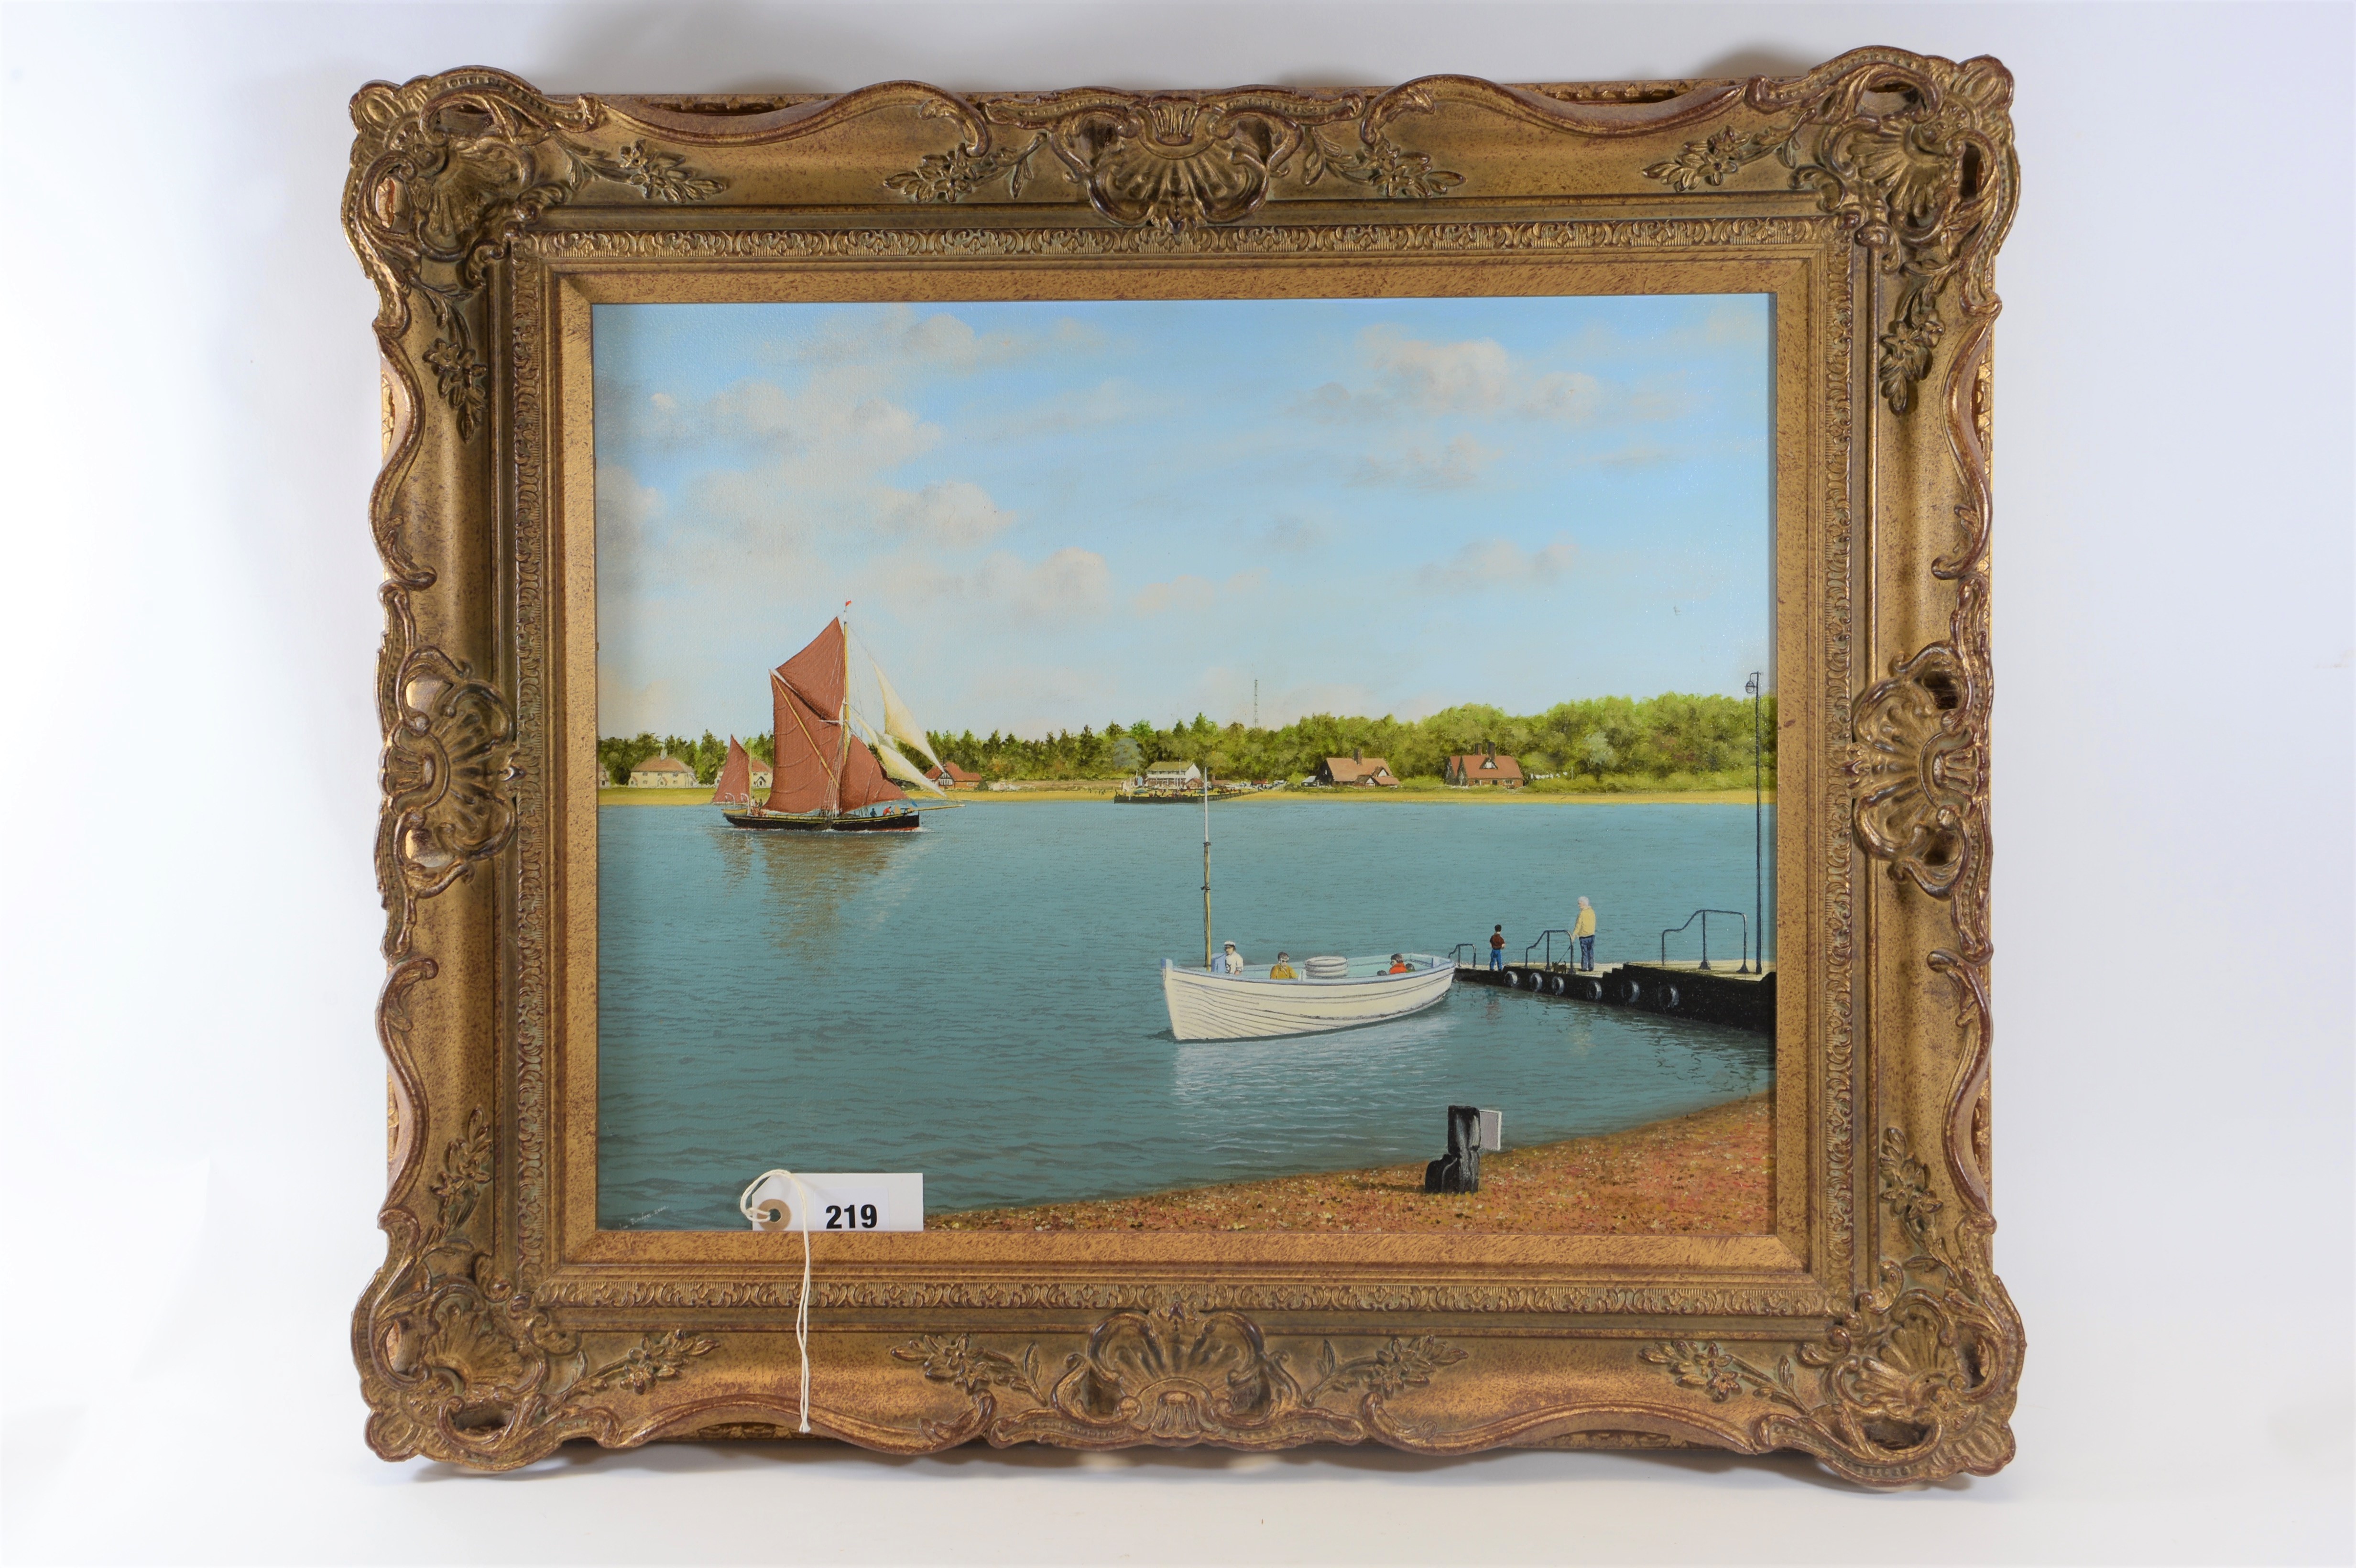 LEN BRIDGES, oil on canvas, figures in boats, 15 ins x 19 ins, in a gilt frame.